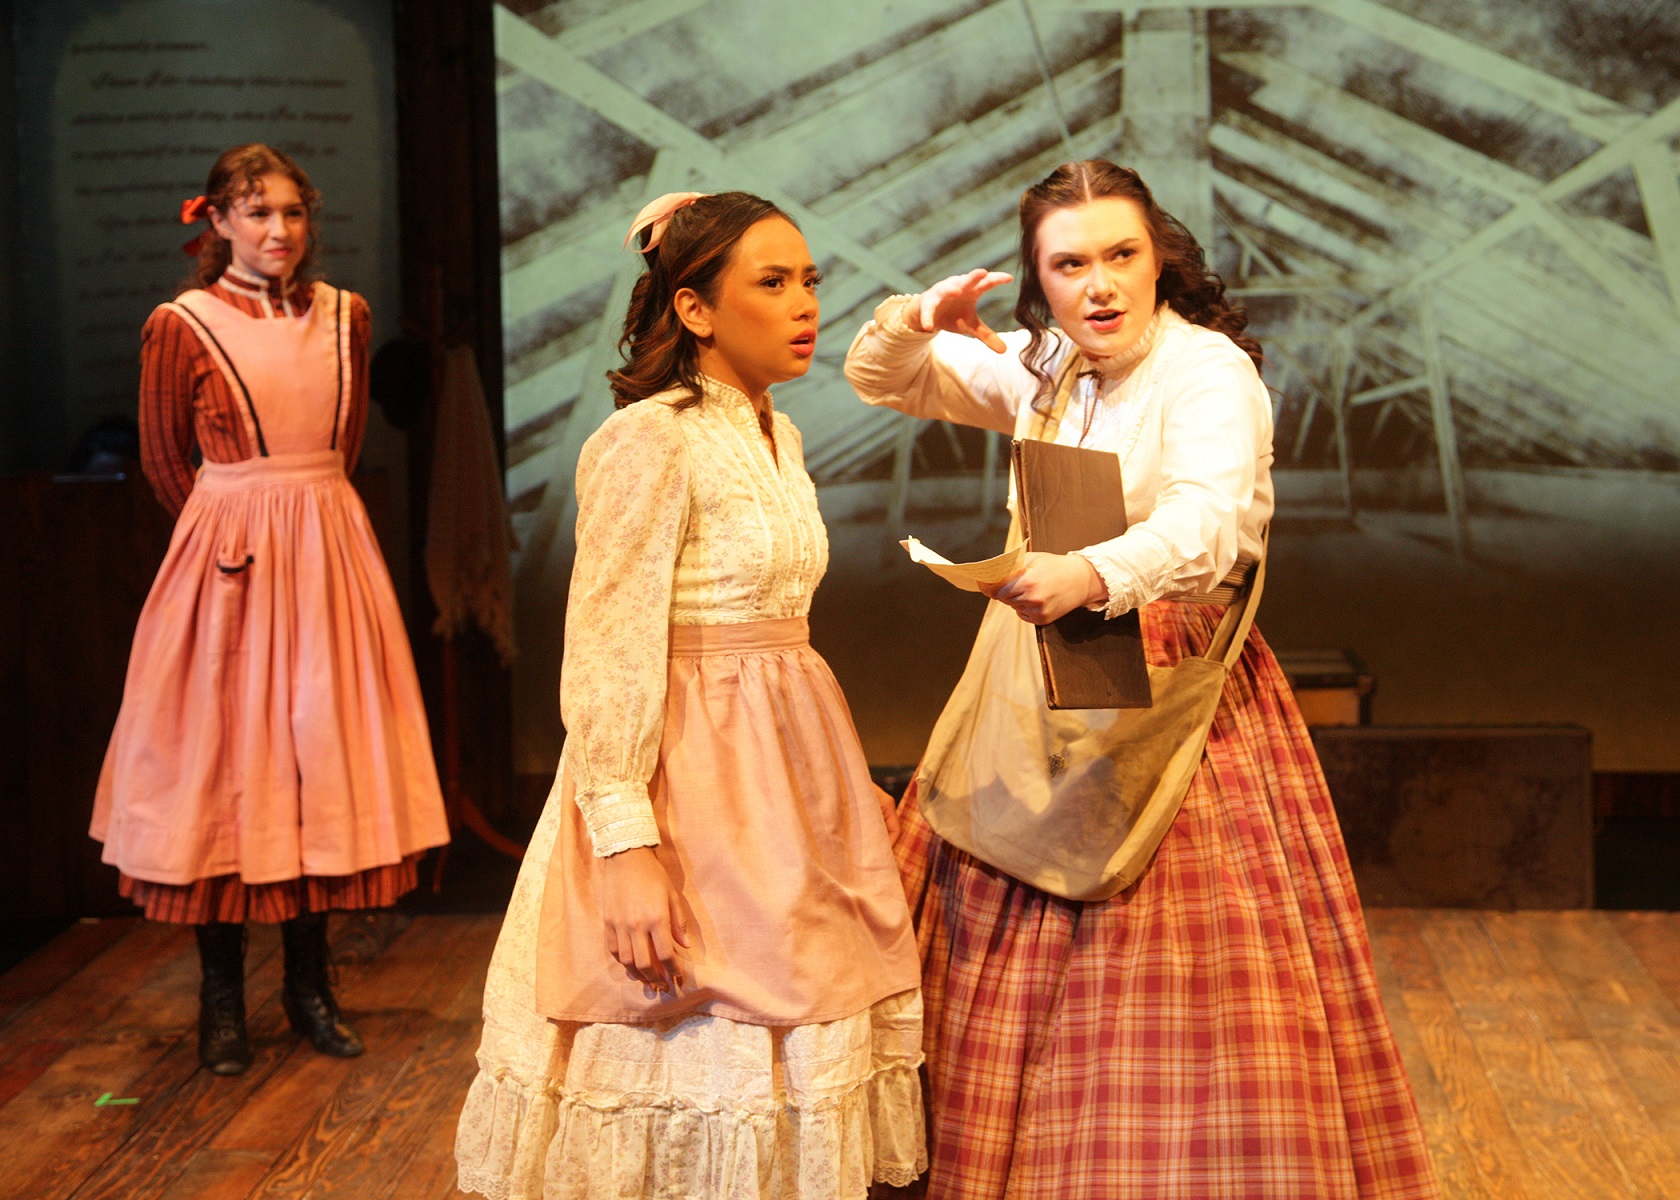 Emily Abeles as Beth March, Camie Del Rosario as Amy March, and Sarah Pierce as Jo March Chance Theater's production of 